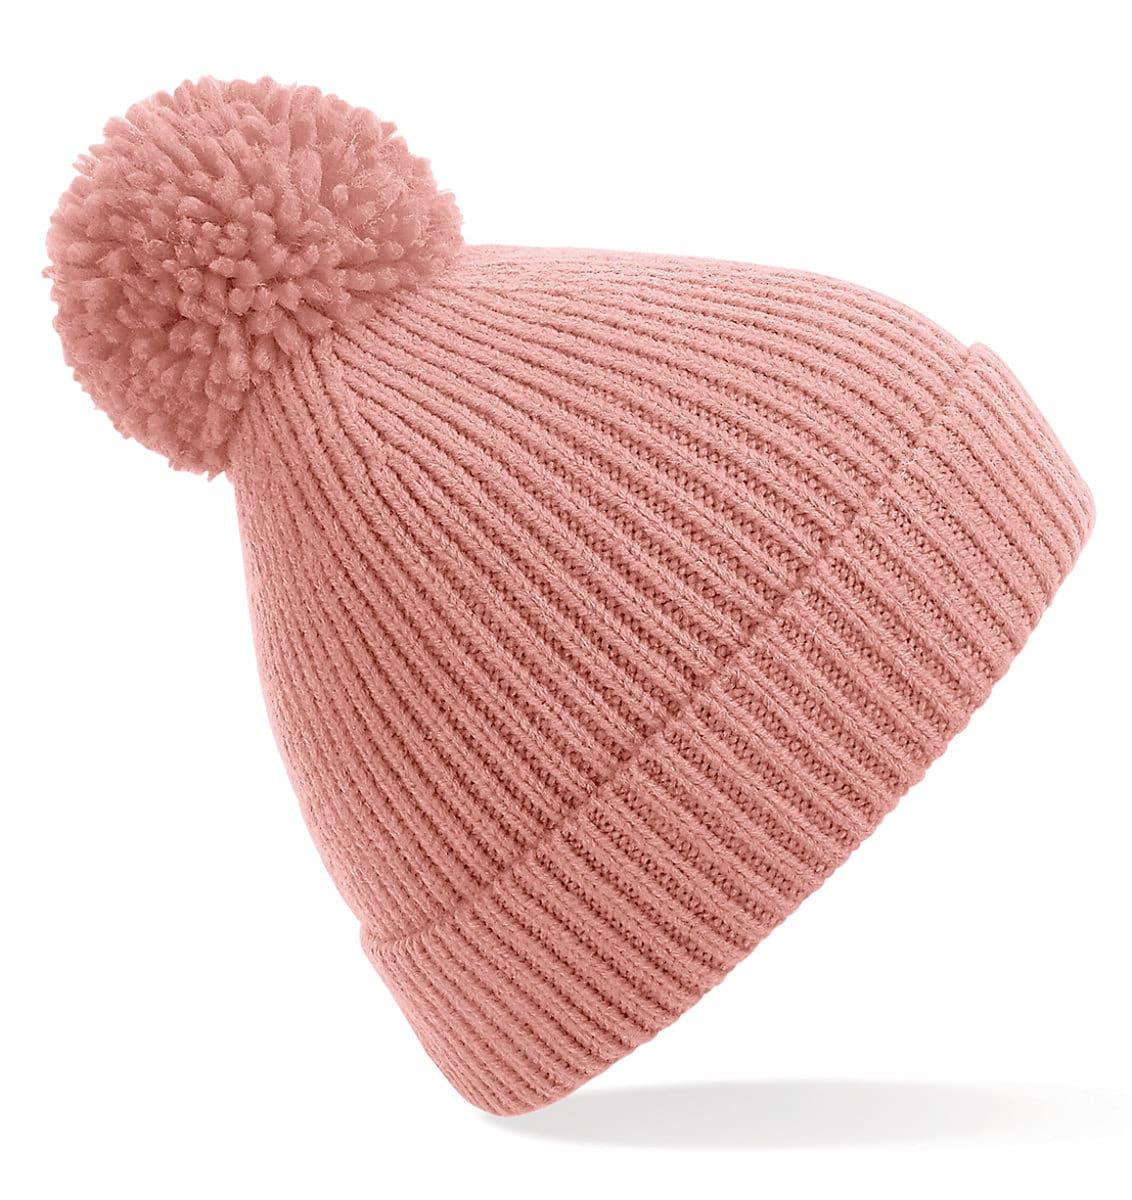 Beechfield Knit Ribbed Pom Pom Beanie Hat in Blush (Product Code: B382)